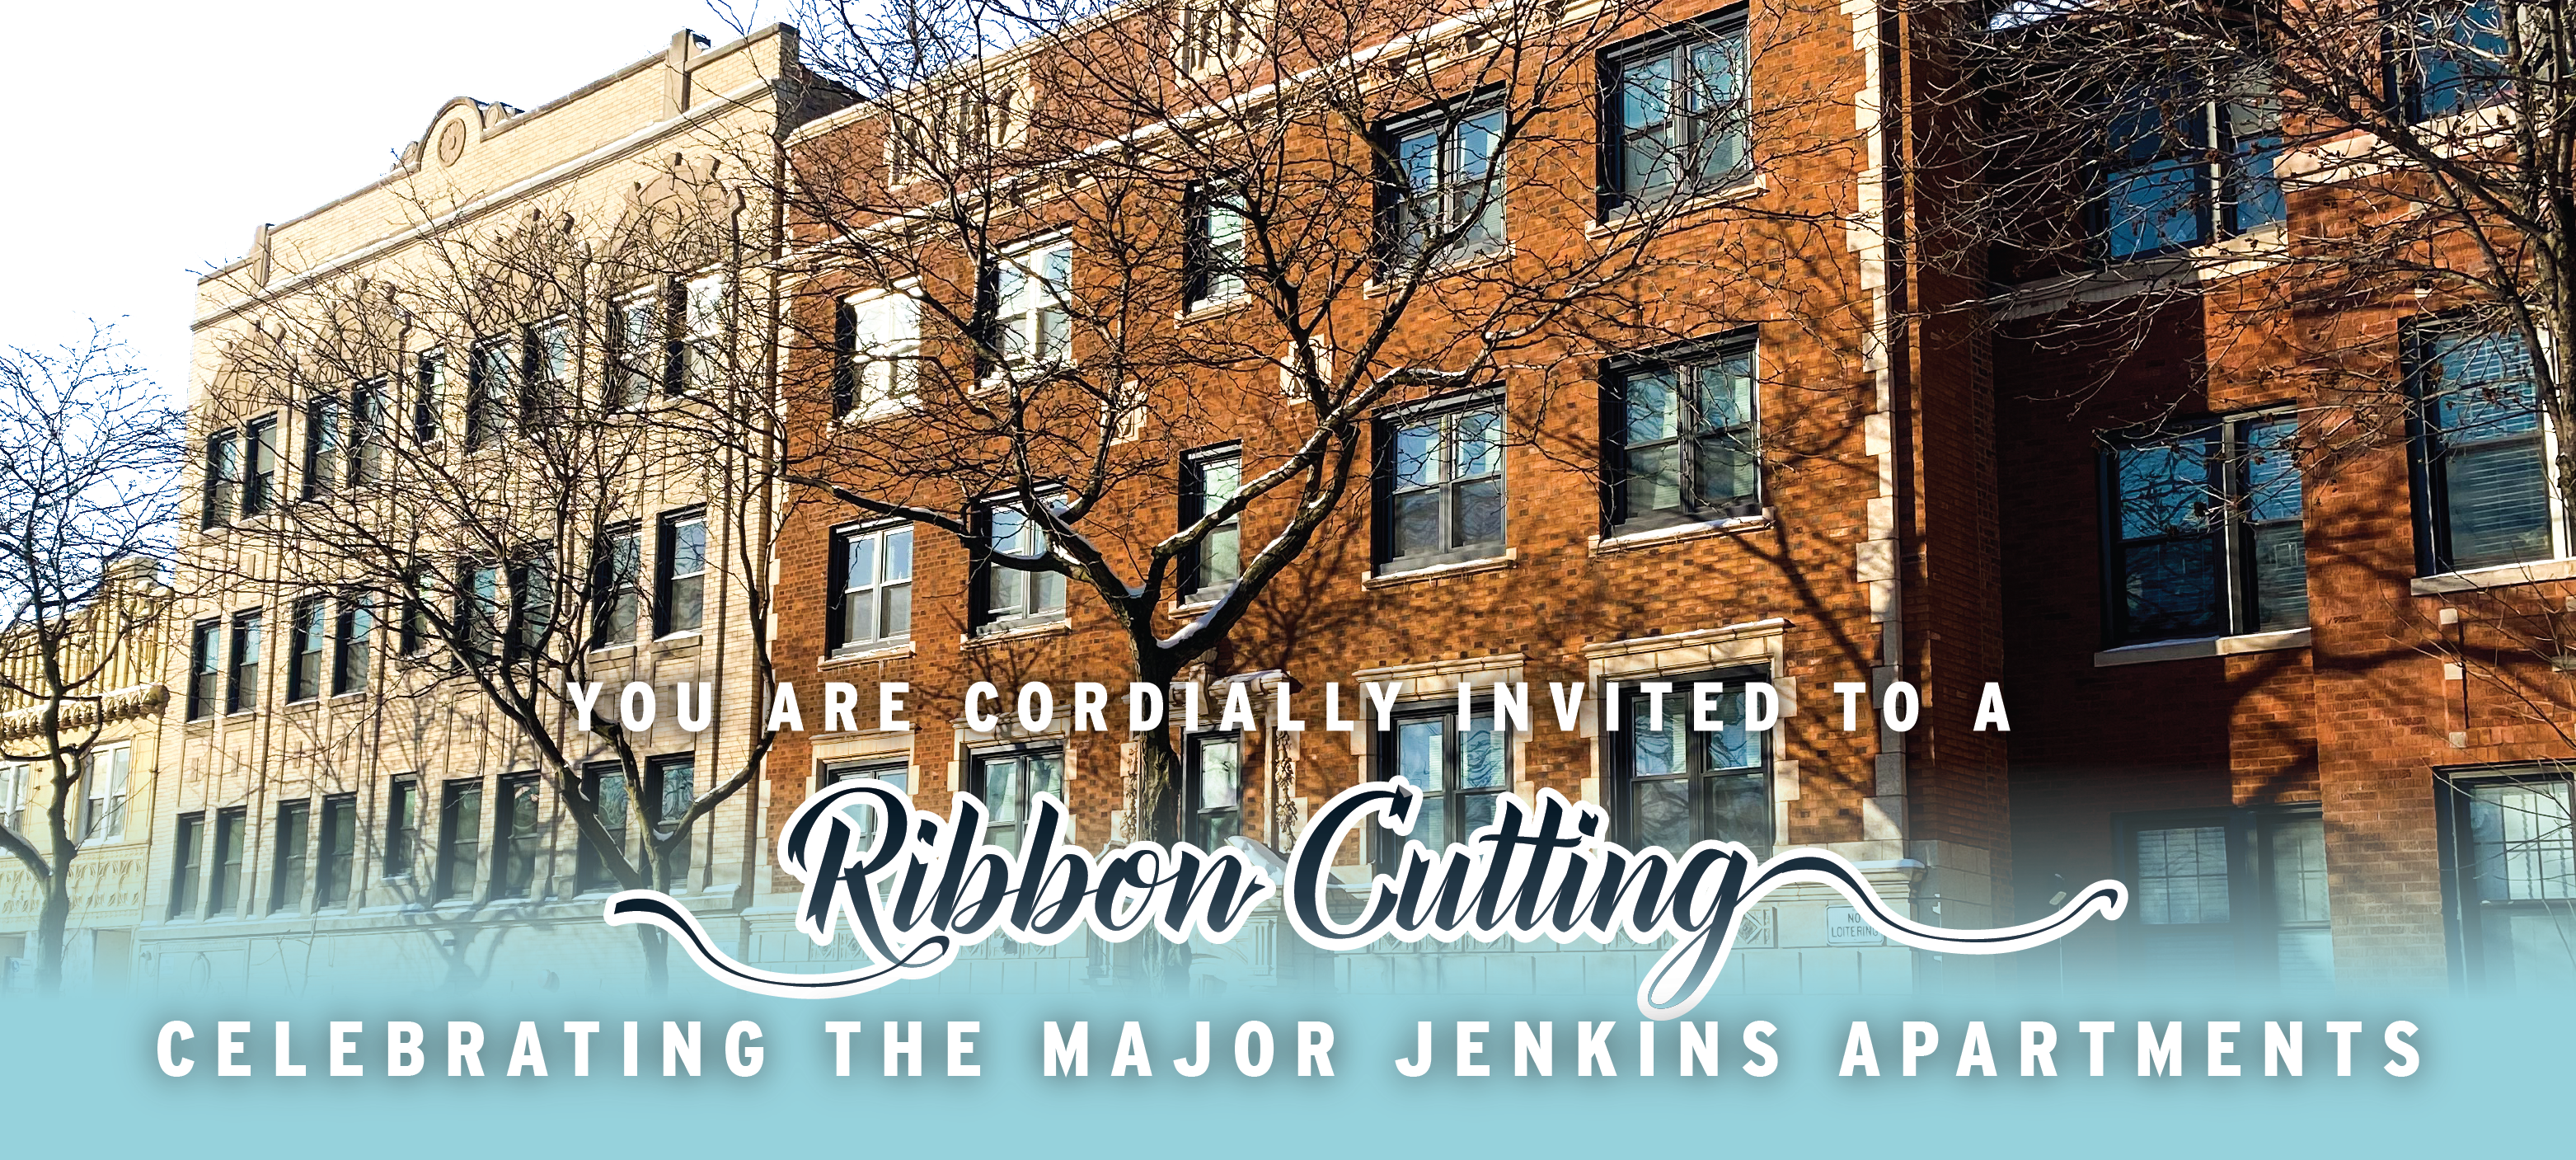 The Grand Reopening Celebration of the Major Jenkins Apartments